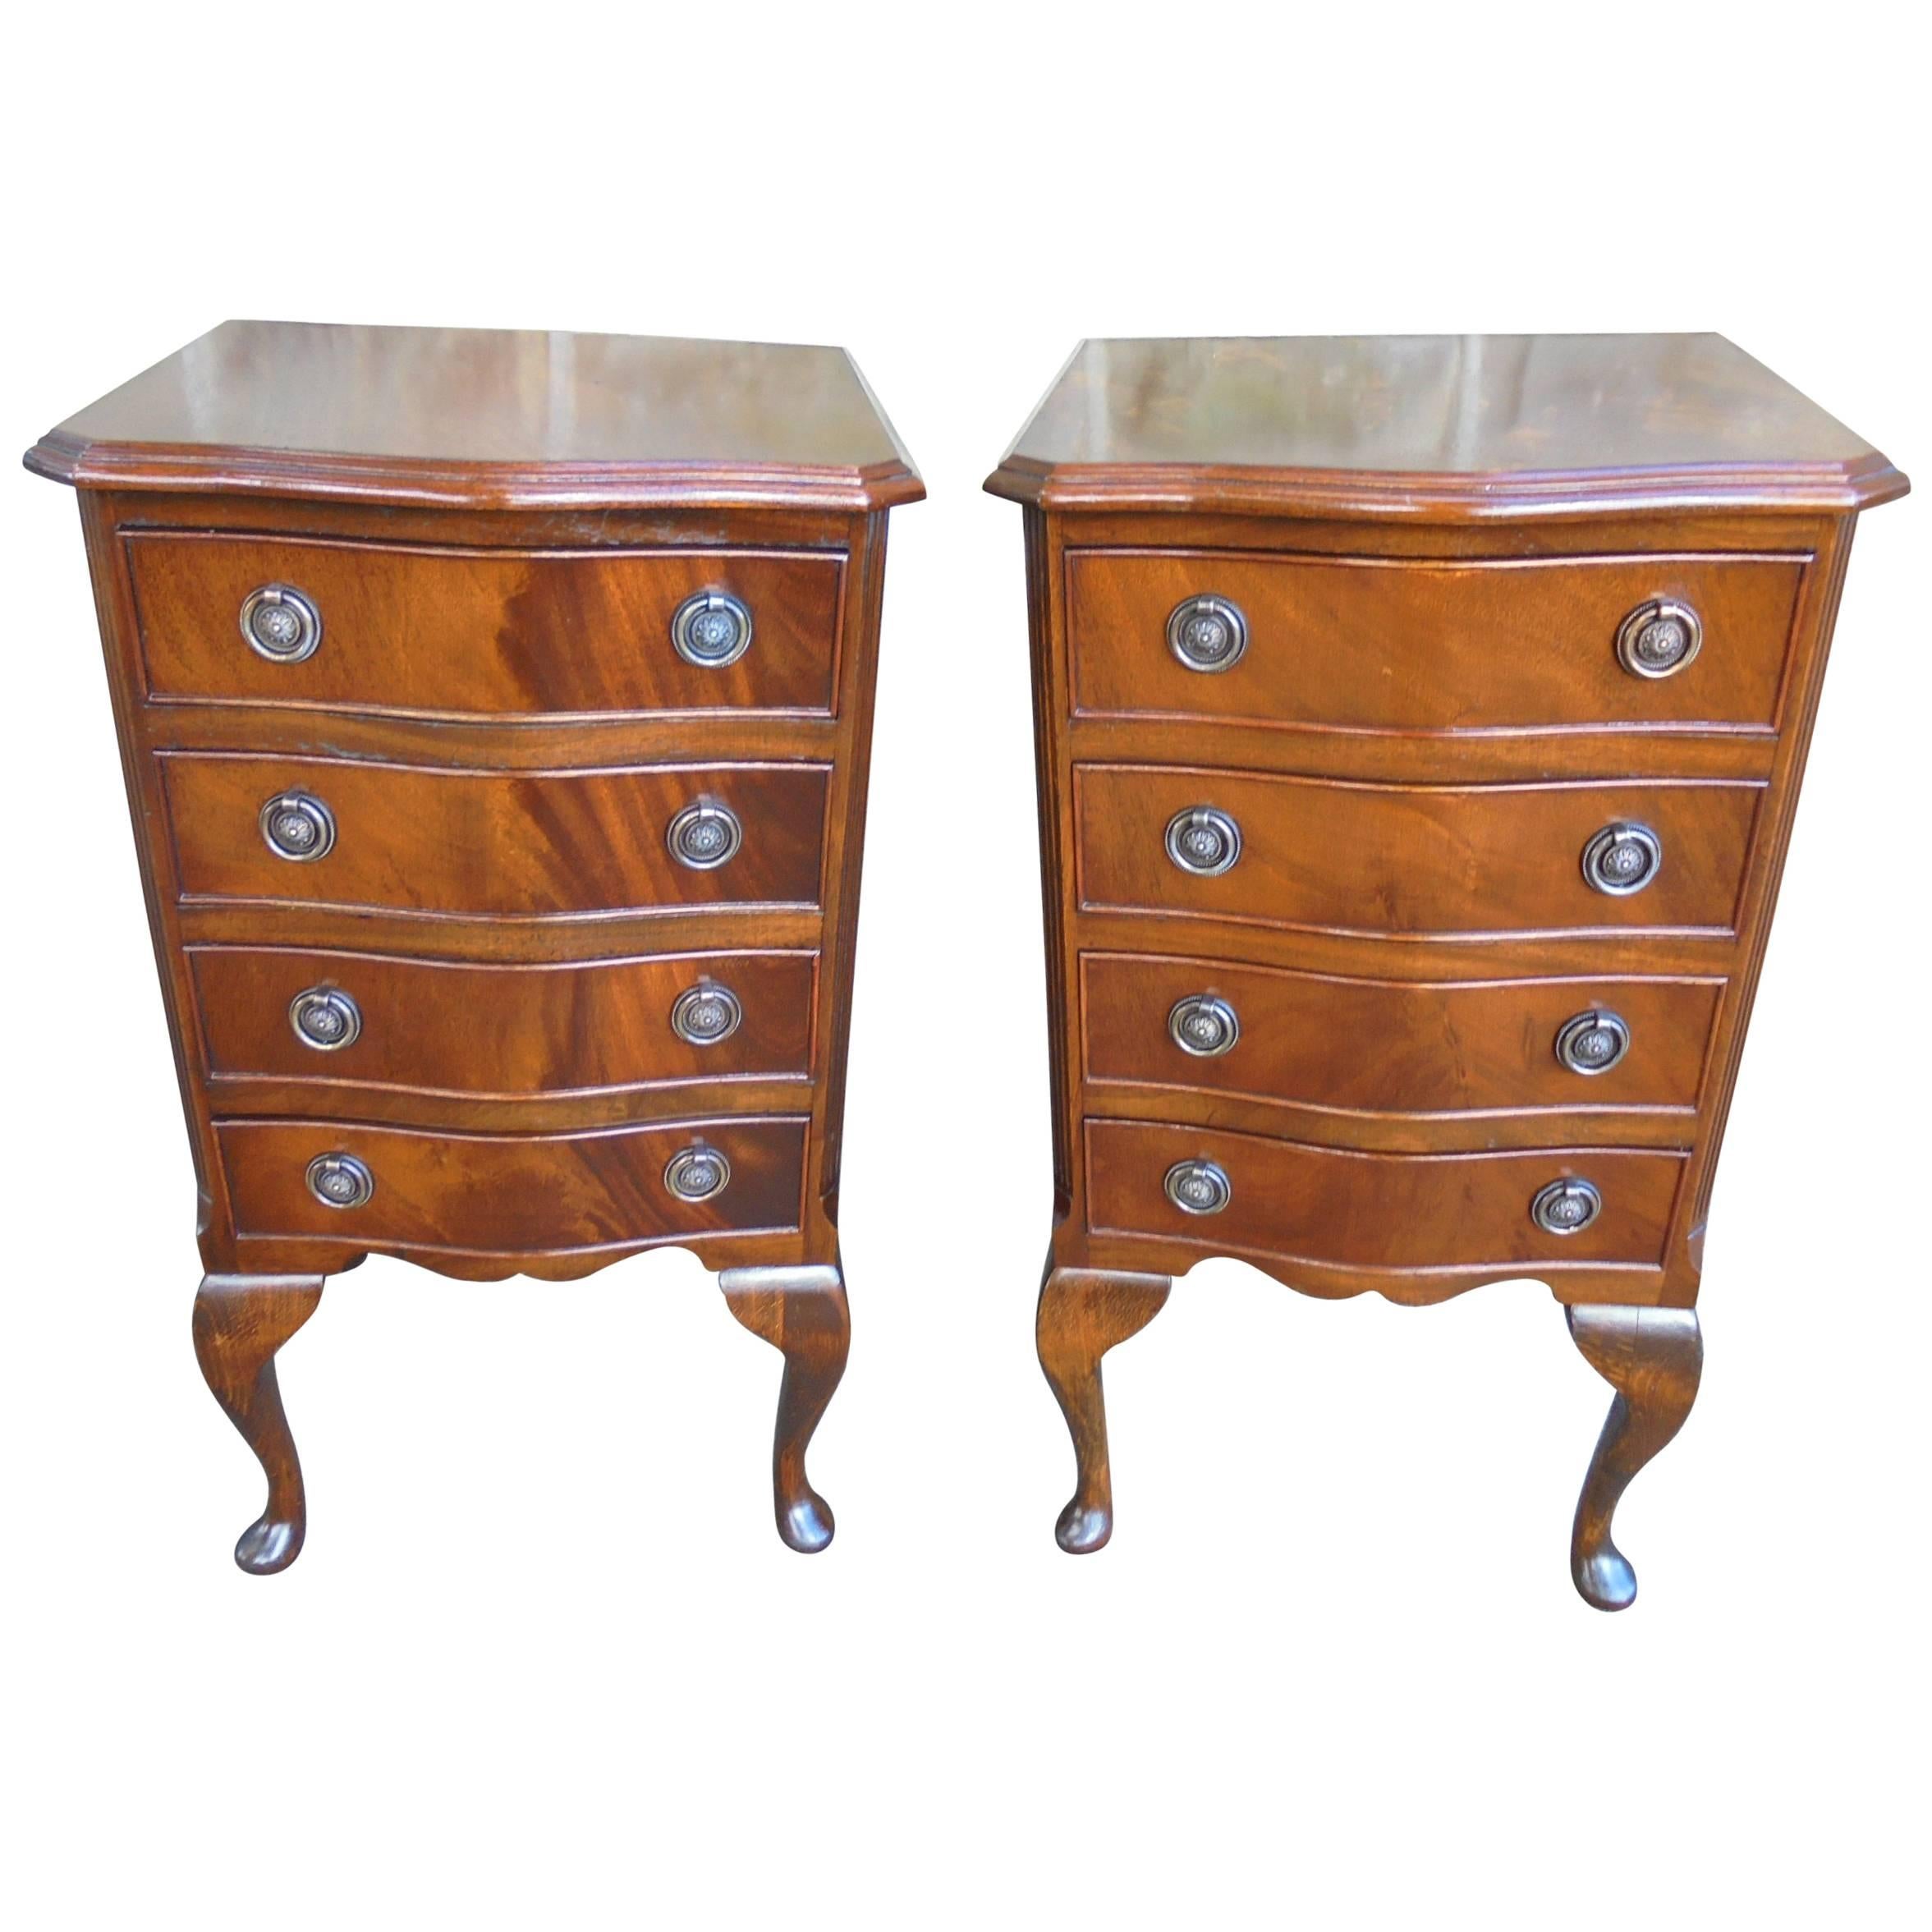 Pair of Antique Mahogany Chest Draws Bedside Chests For Sale